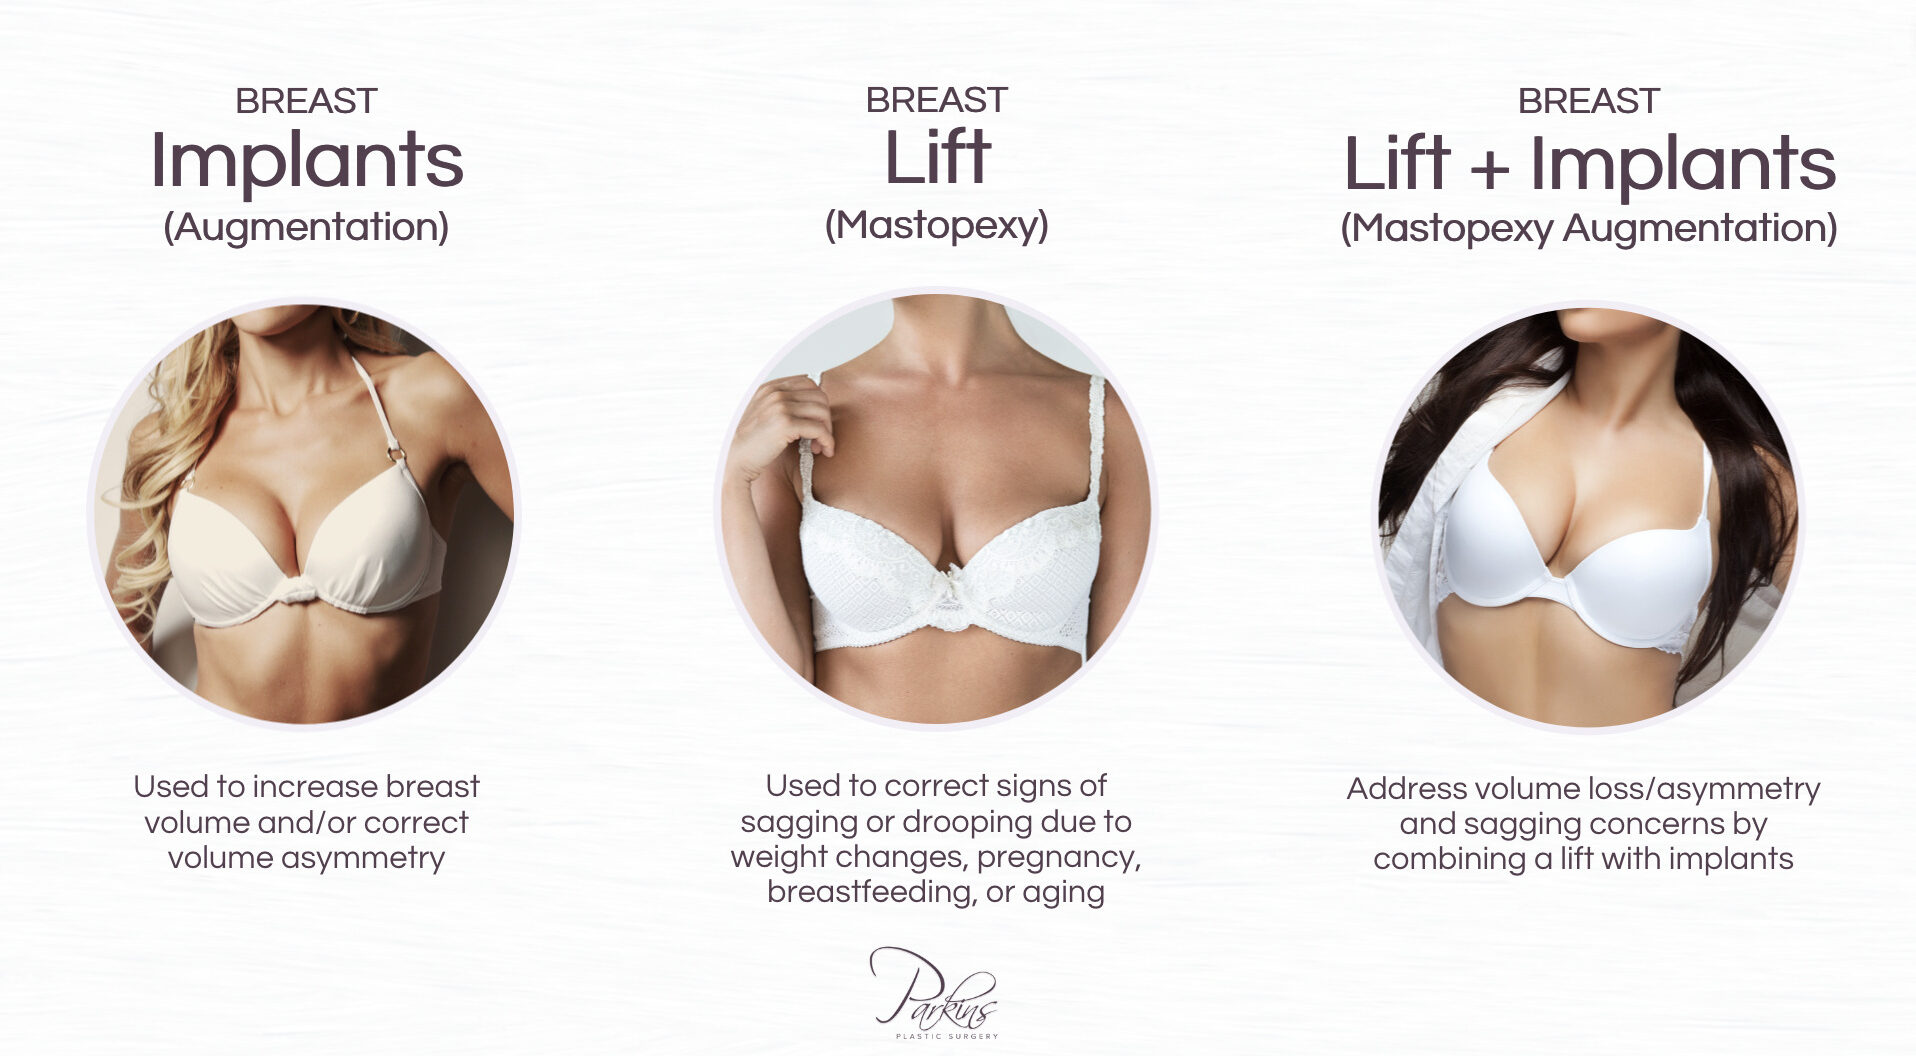 How Long After Breastfeeding Can I Get a Breast Lift?